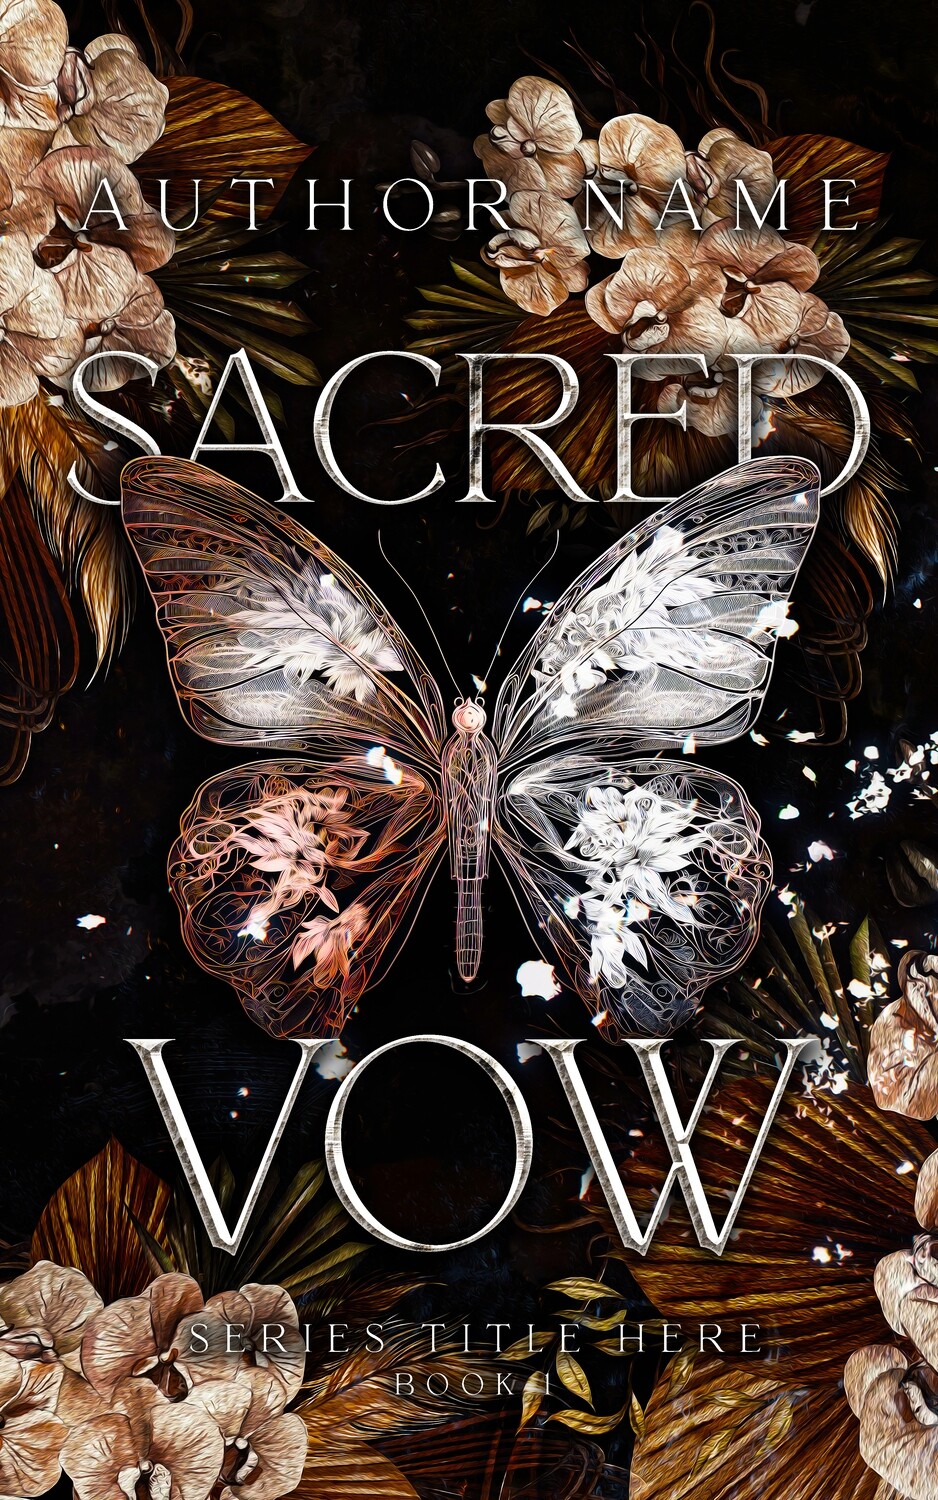 SACRED VOW